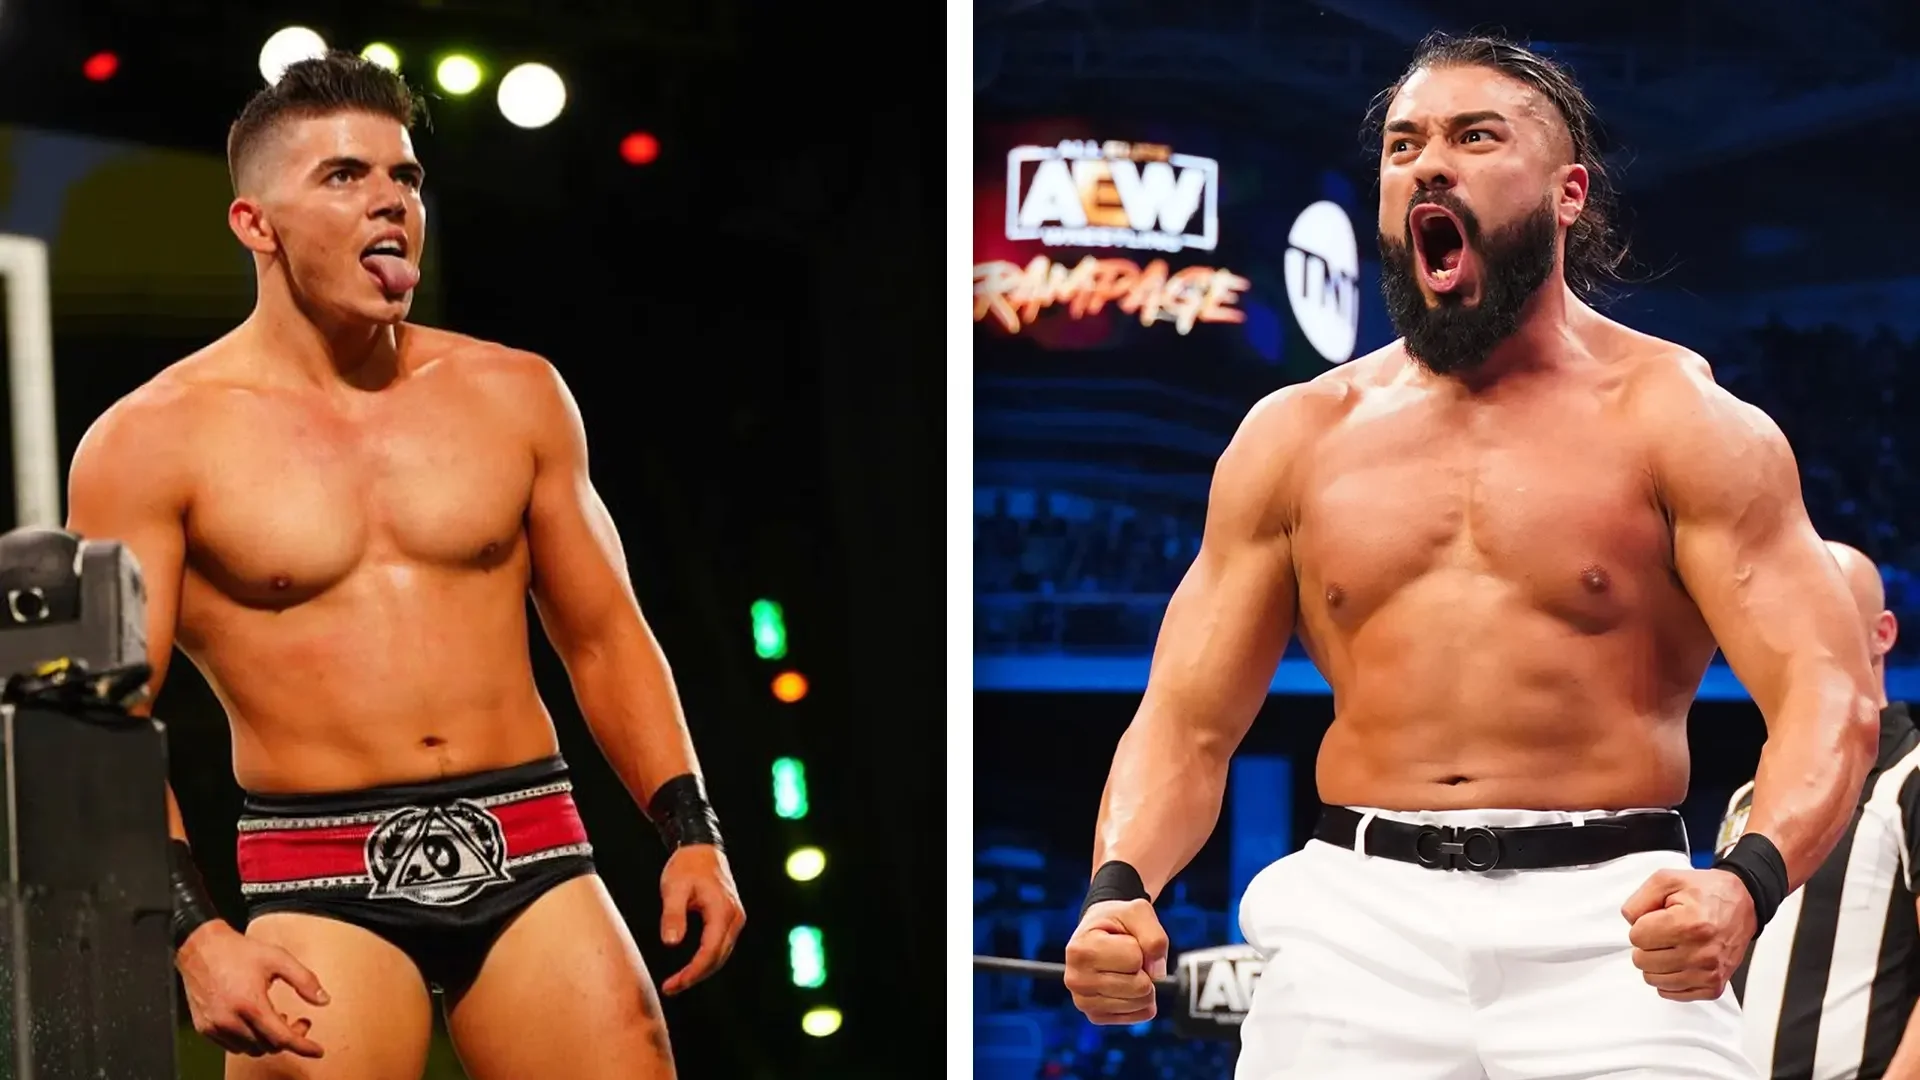 Andrade and Sammy Guevara Reportedly Had Backstage Fight, Andrade Removed From AEW & Sent Home